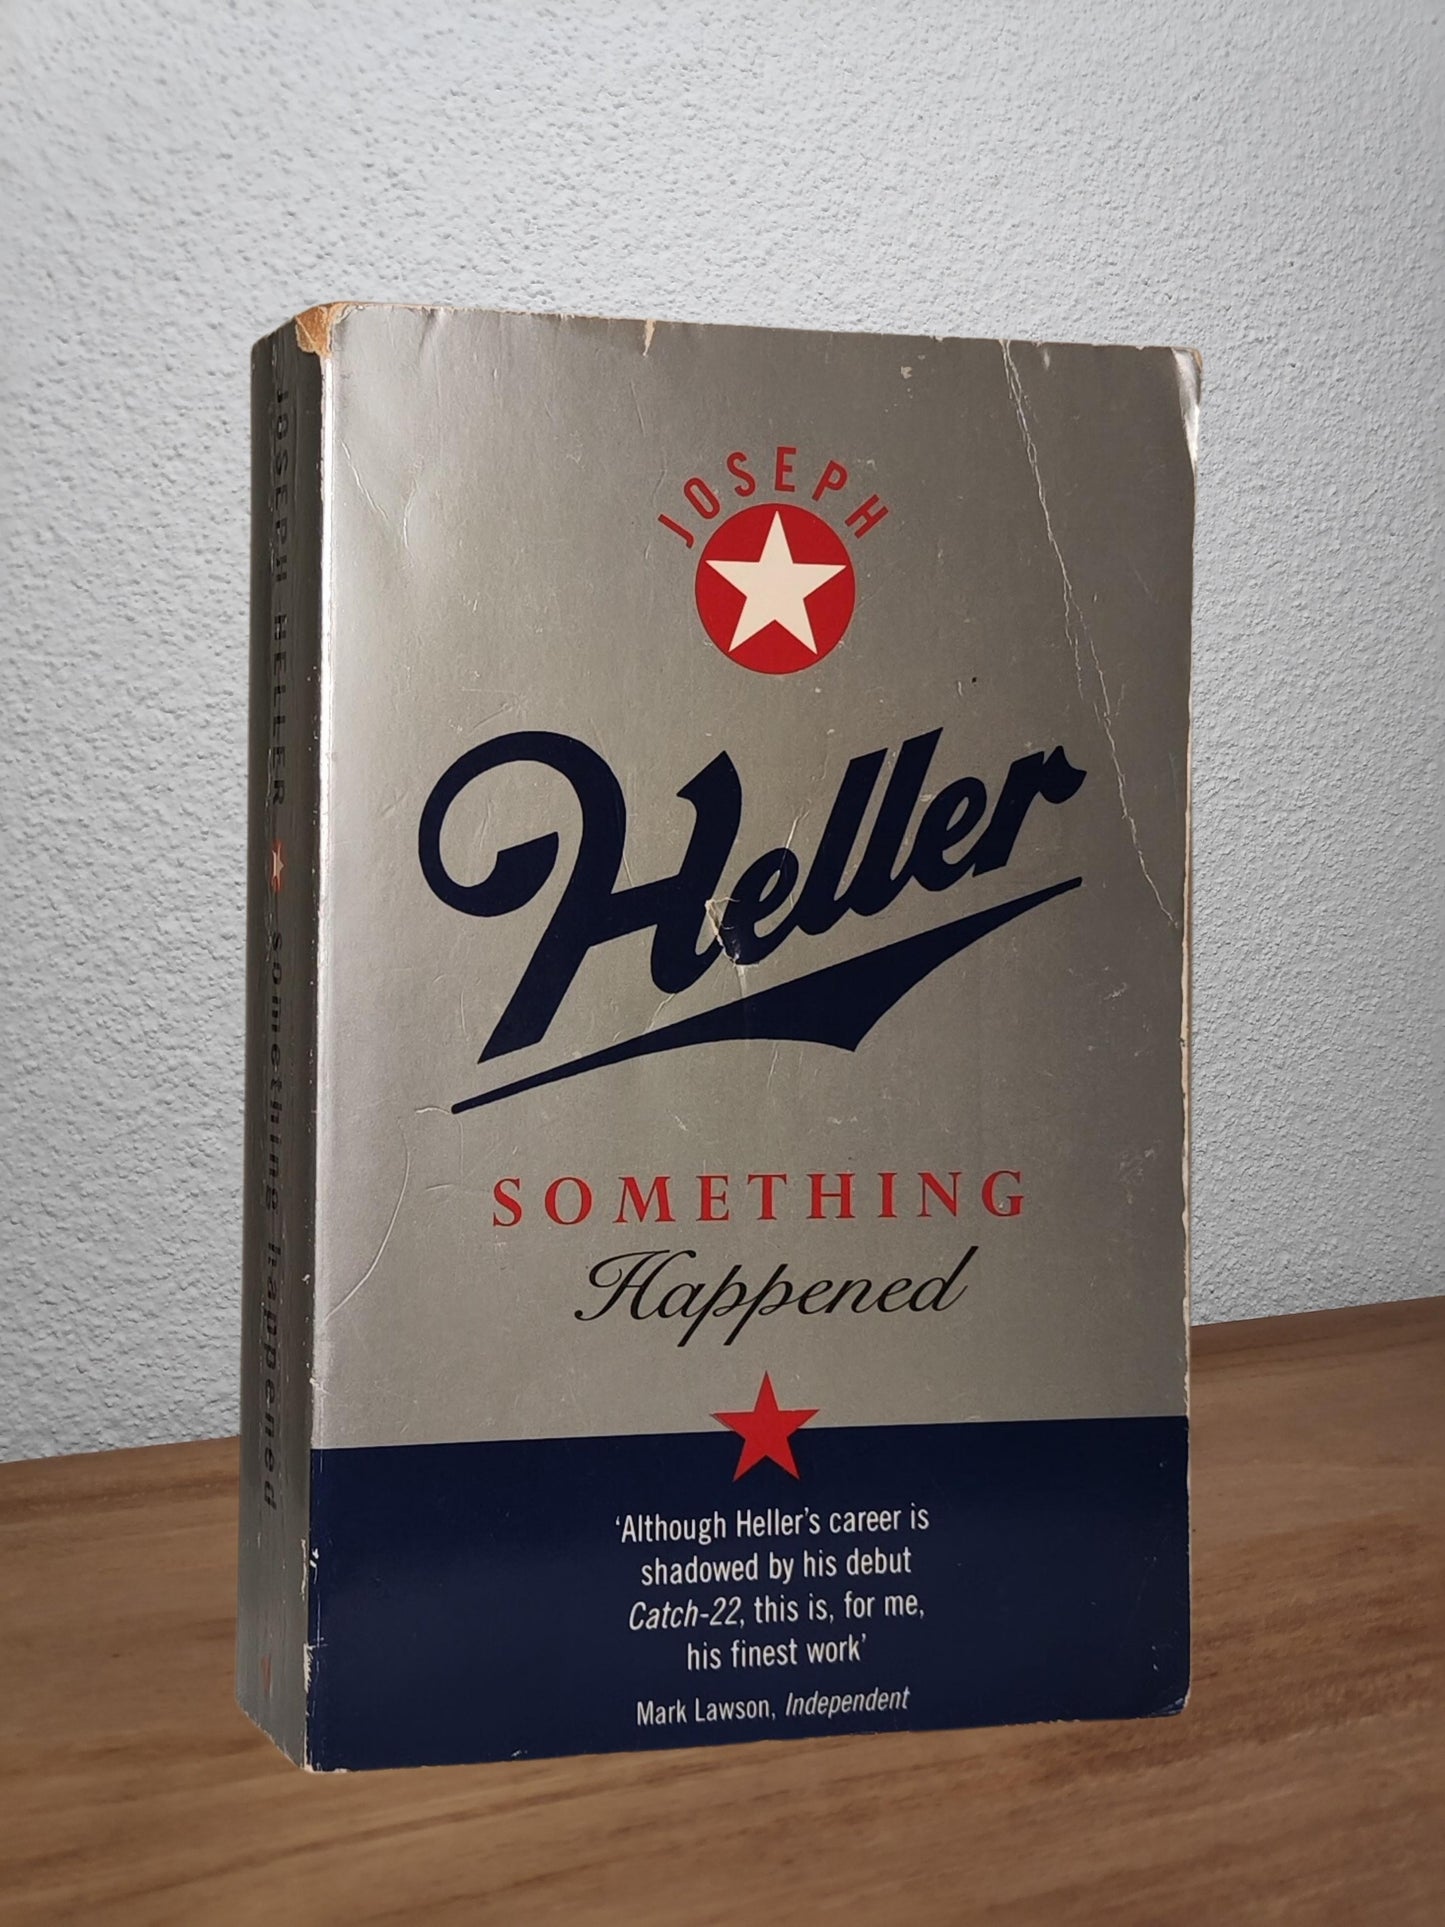 Joseph Heller - Something Happened - Second-hand english book to deliver in Zurich & Switzerland